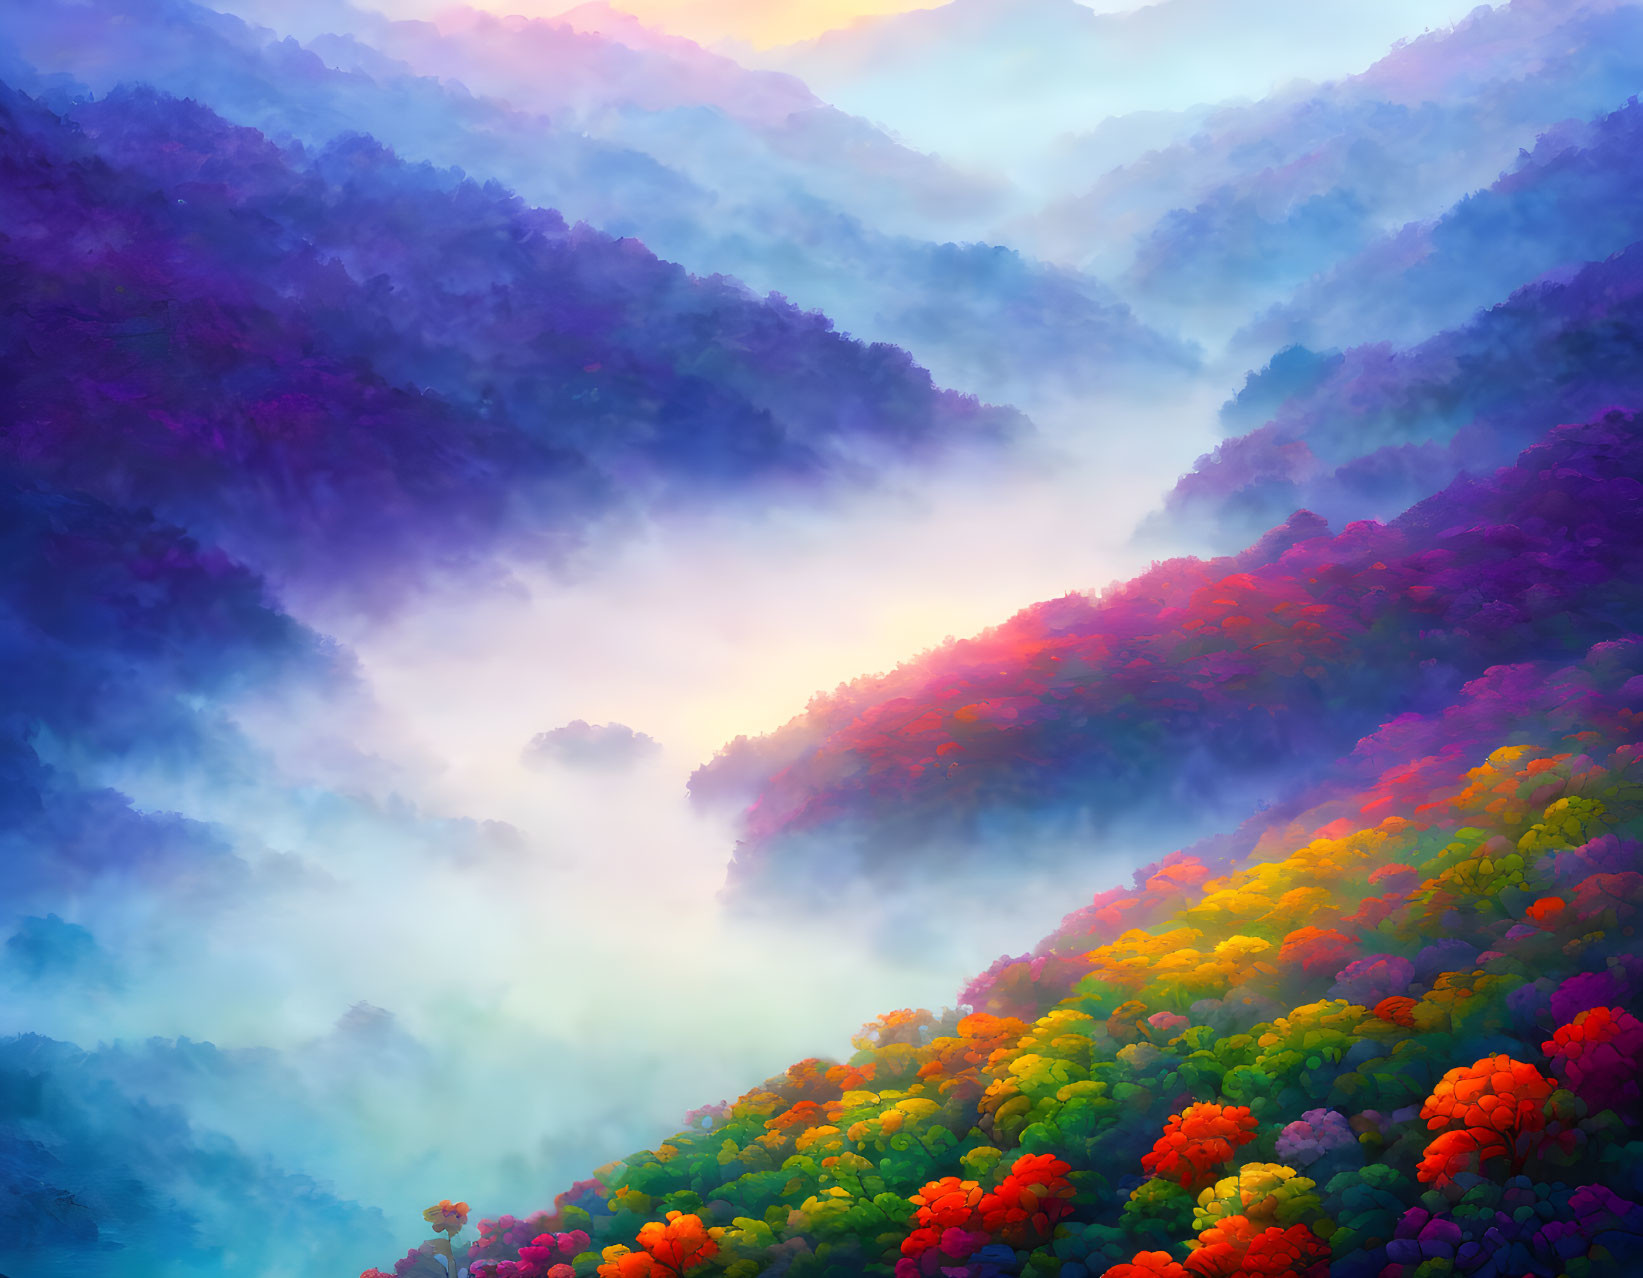 Colorful Mountain Ranges with Mist and Pastel Sky